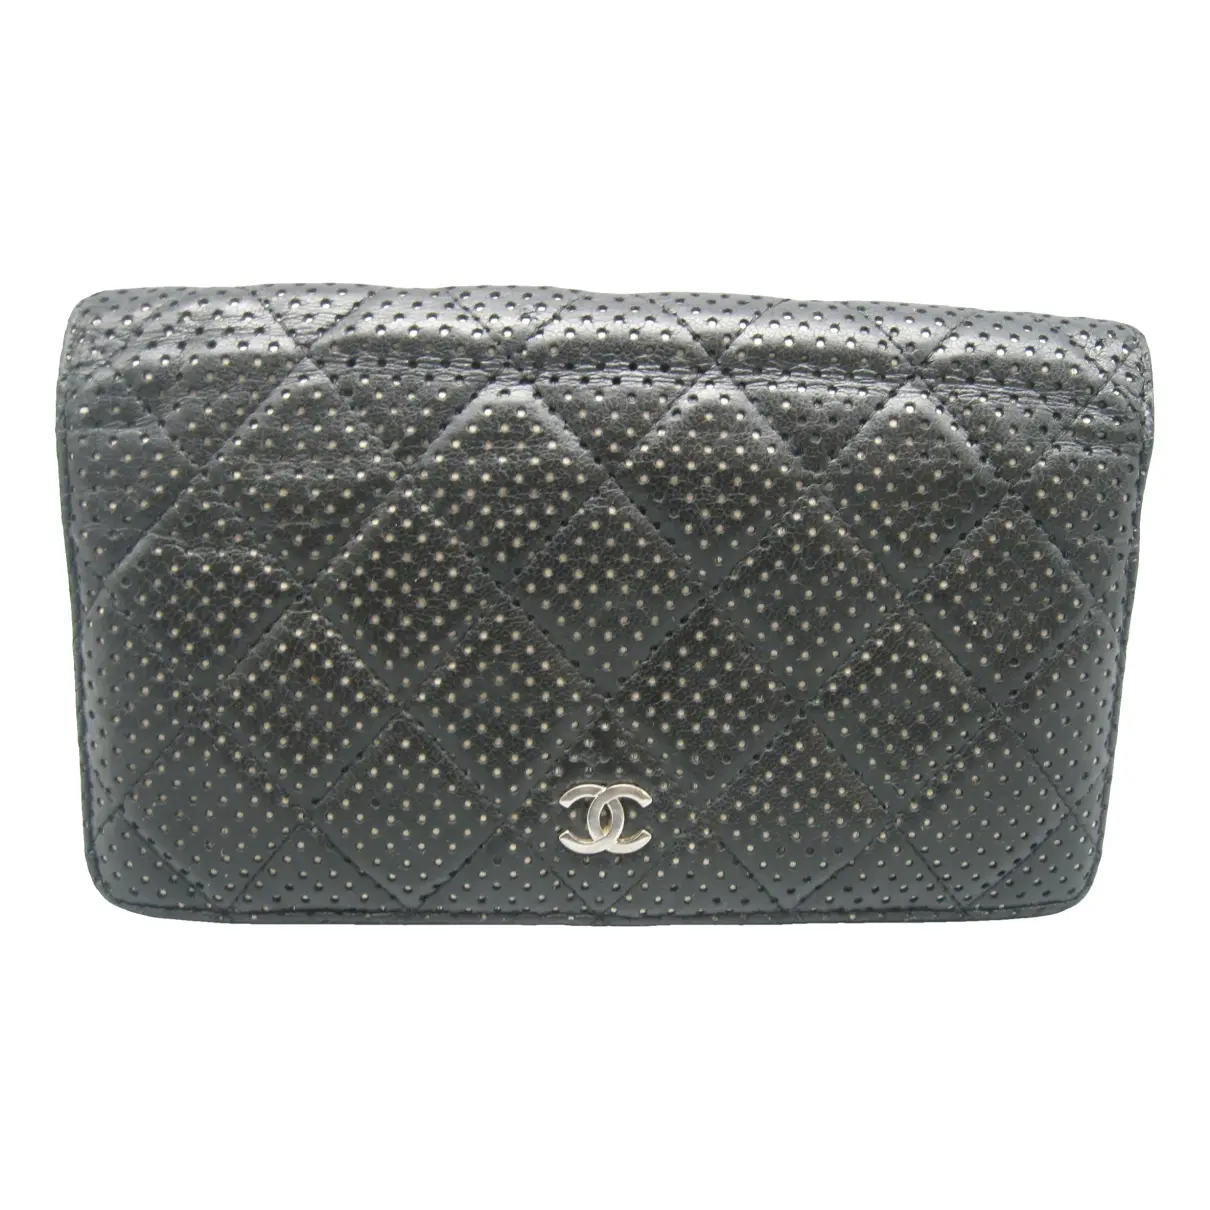 Wallet On Chain Timeless/Classique leather handbag Chanel